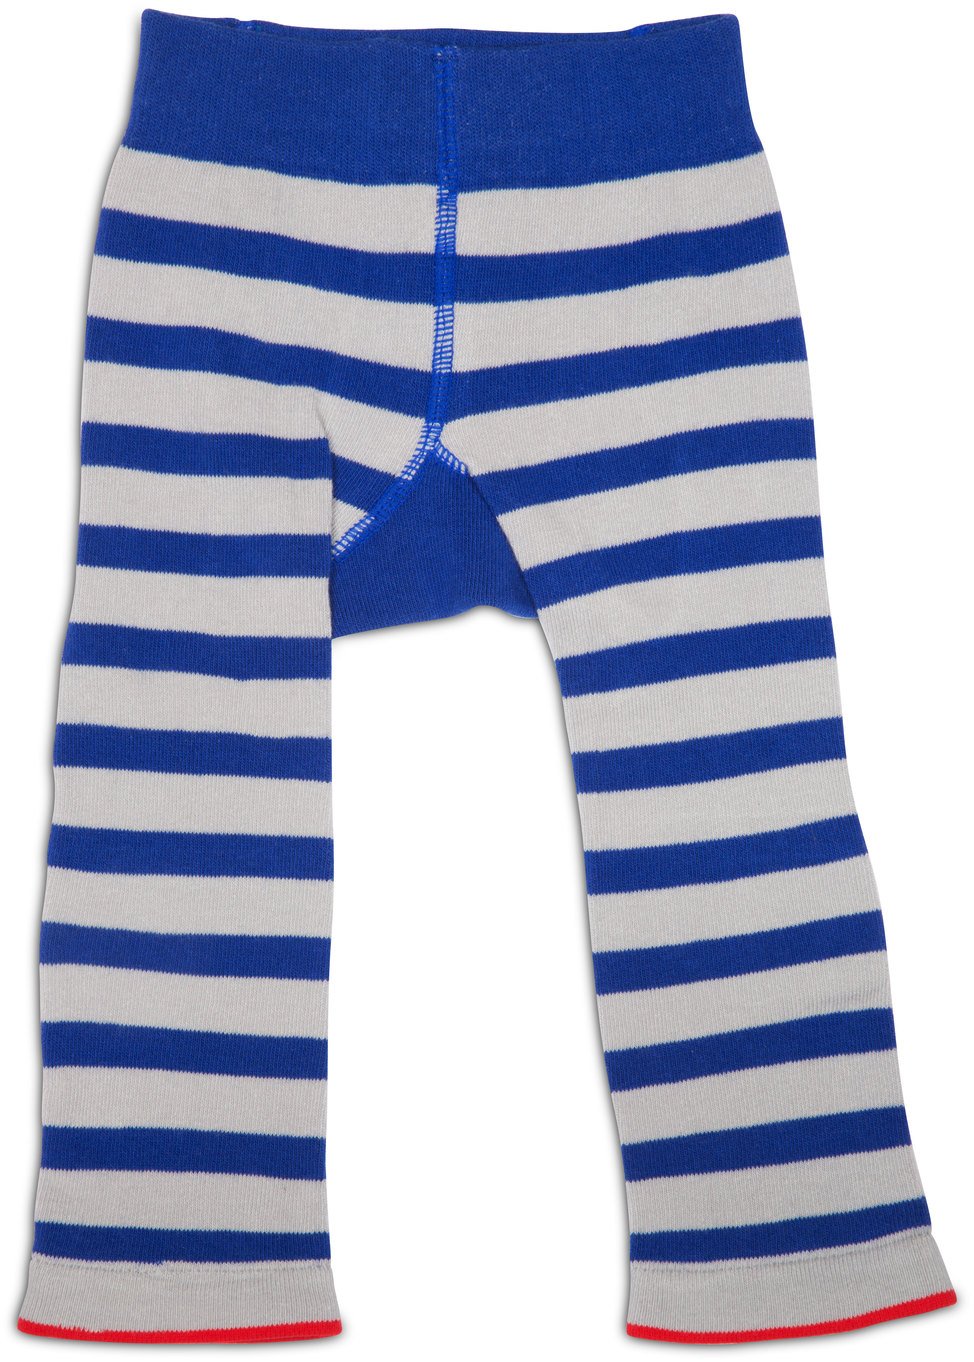 Red and Blue Train Baby Leggings Baby Leggings Izzy & Owie - GigglesGear.com